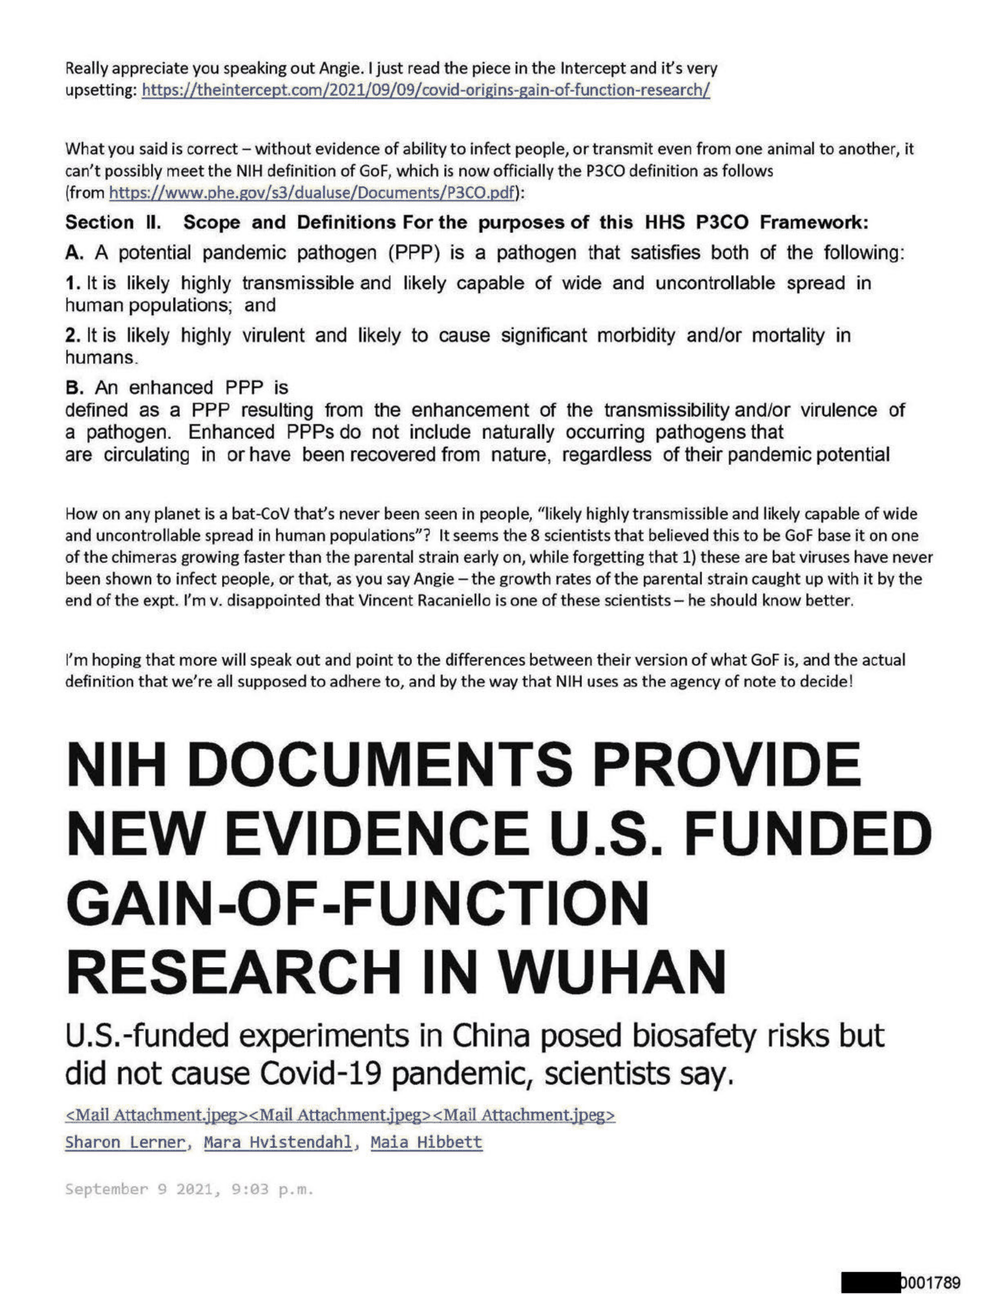 Page 16 from David Morens NIH Emails Redacted